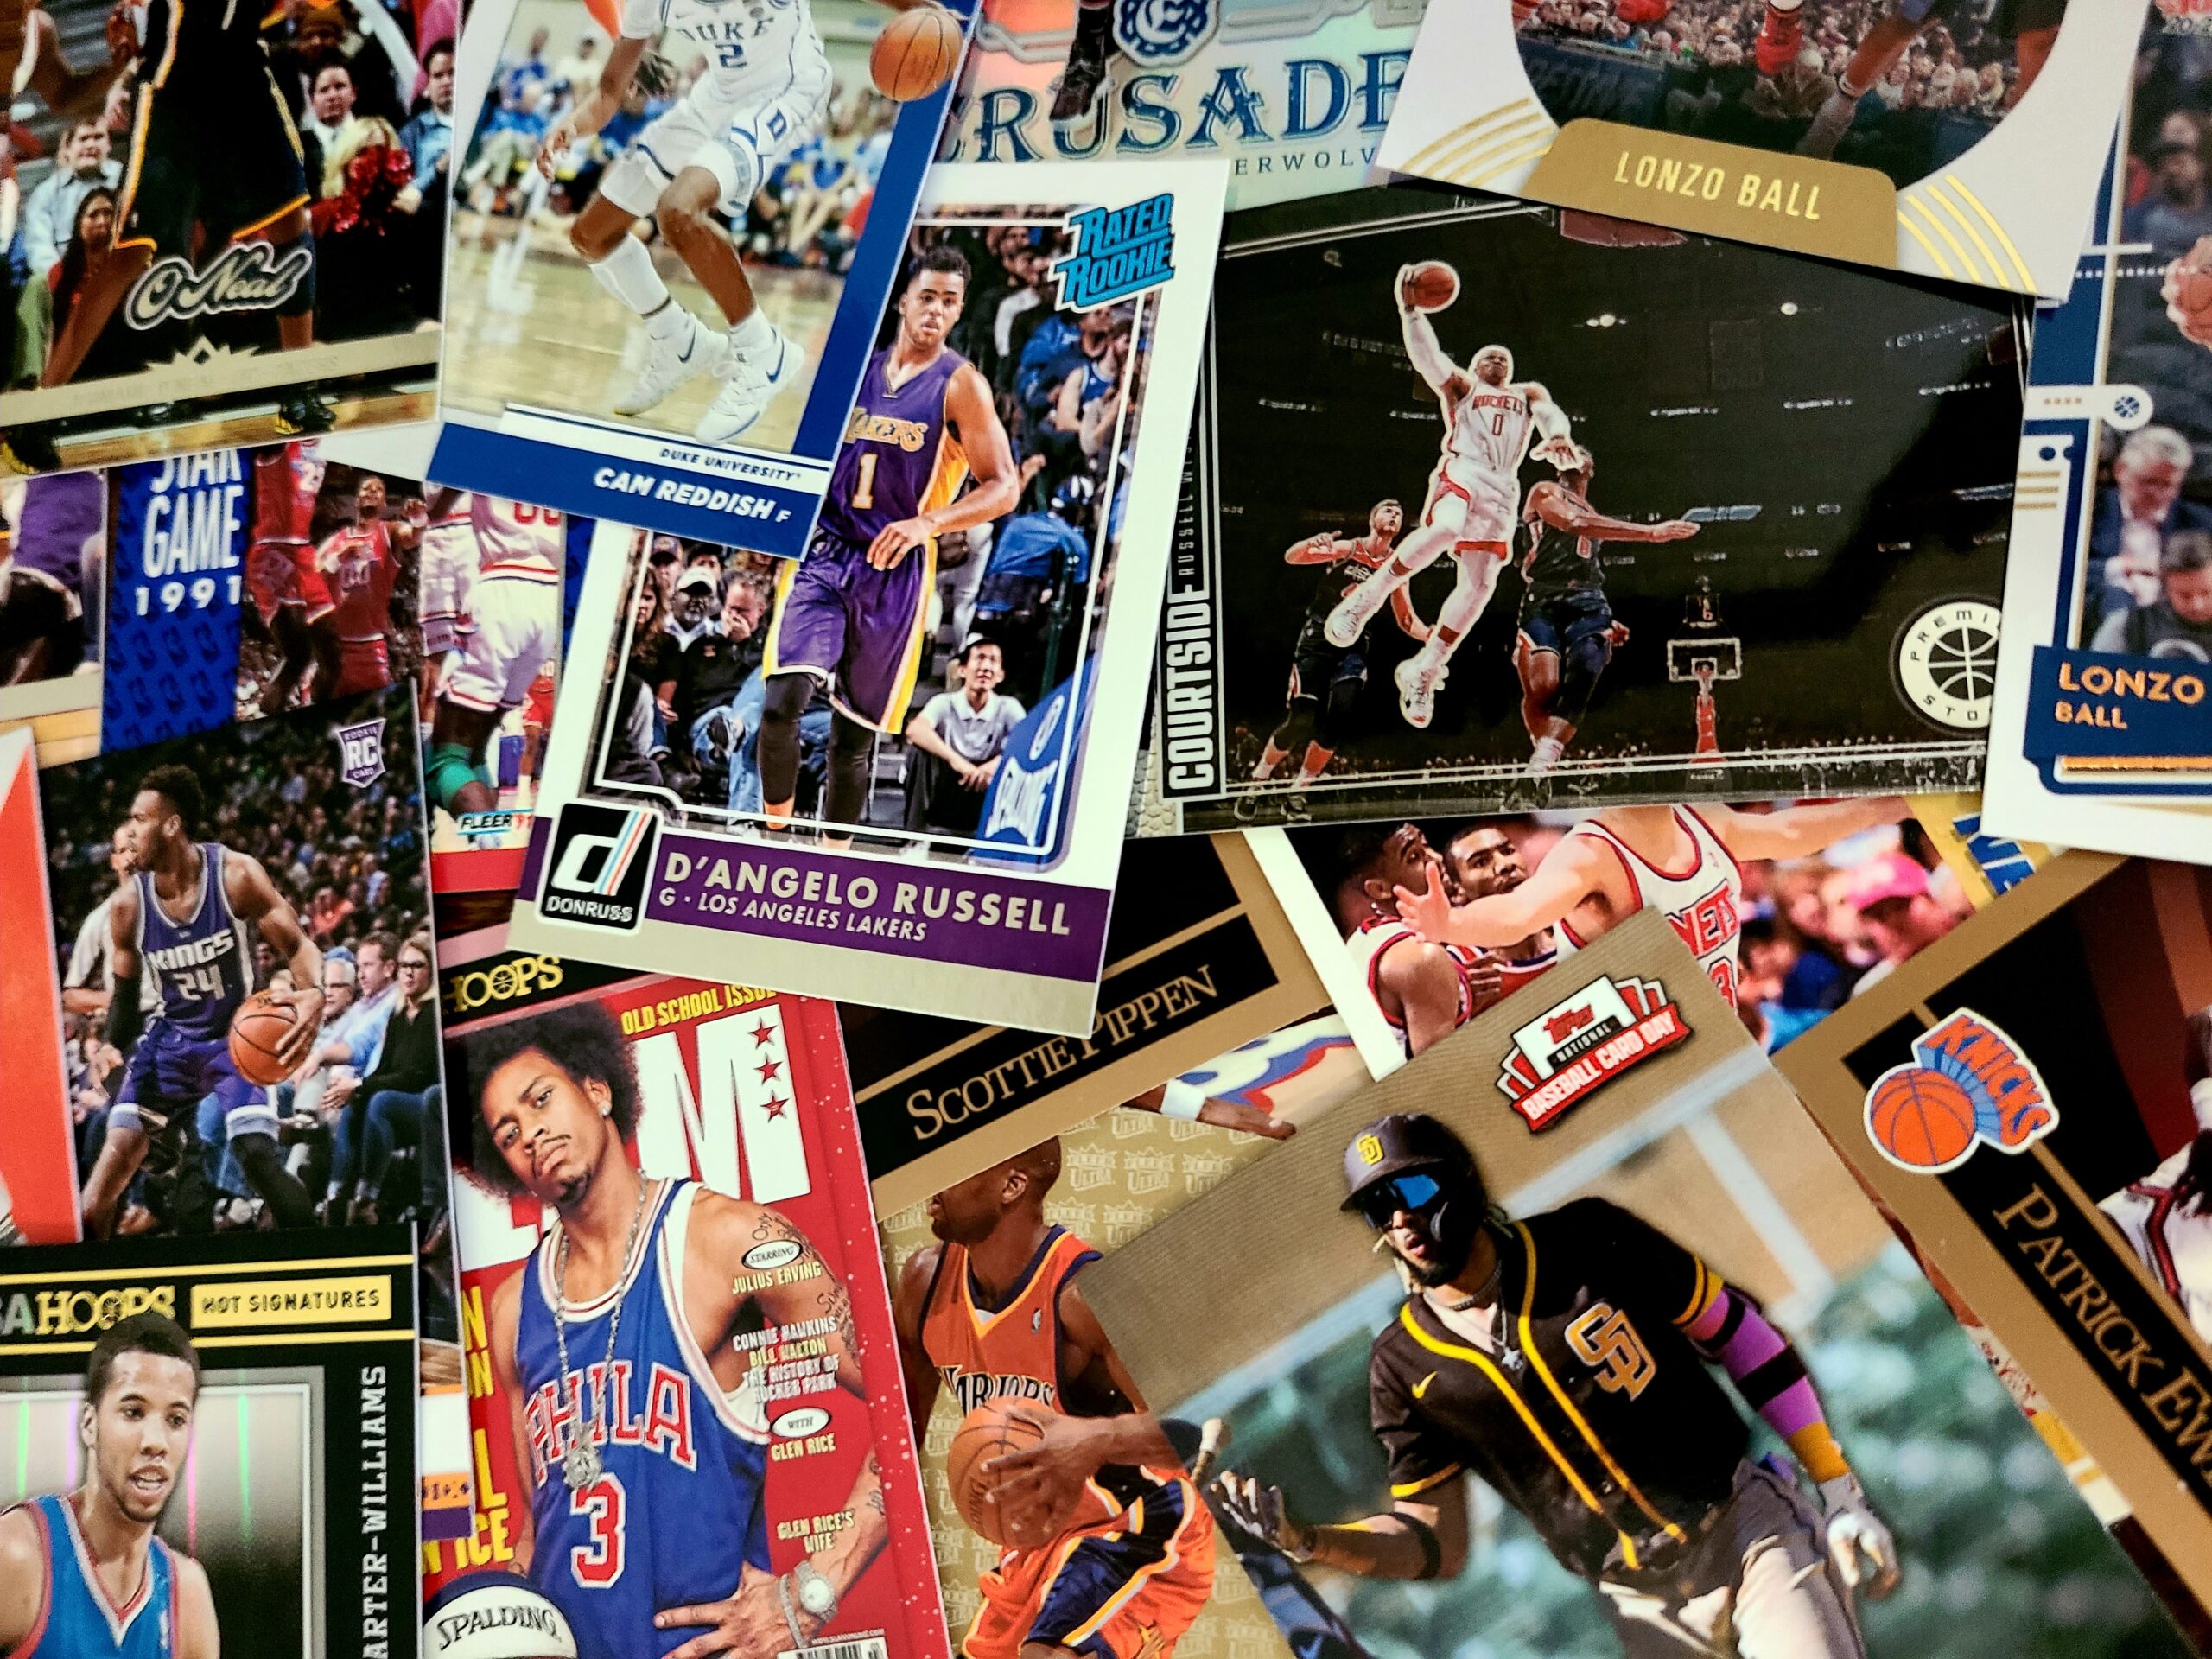 A collection of basketball cards. Photo by: Matthew McGuire